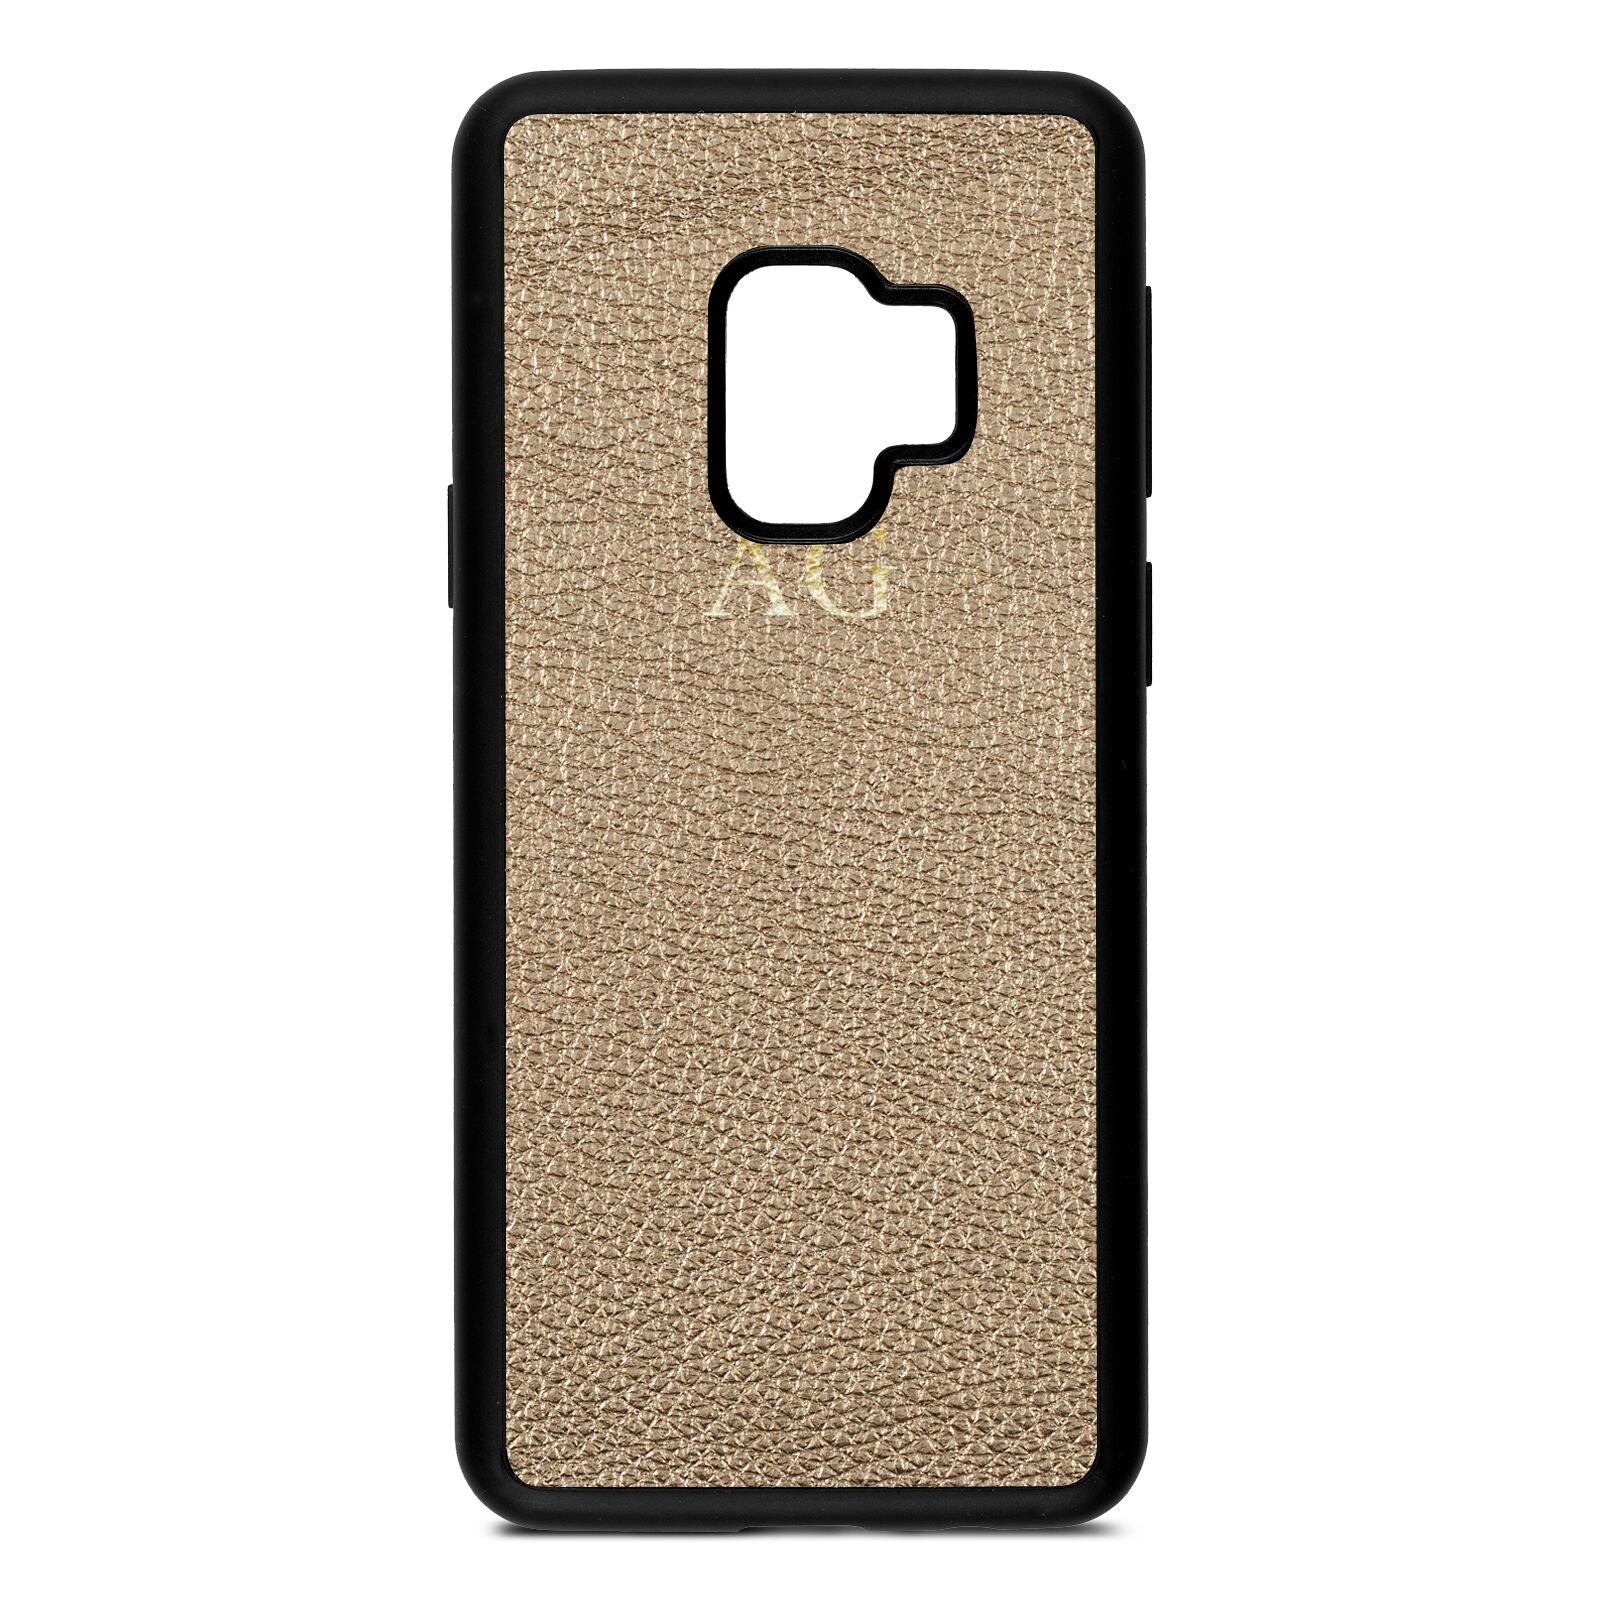 Personalised Gold Pebble Leather Samsung S9 Case